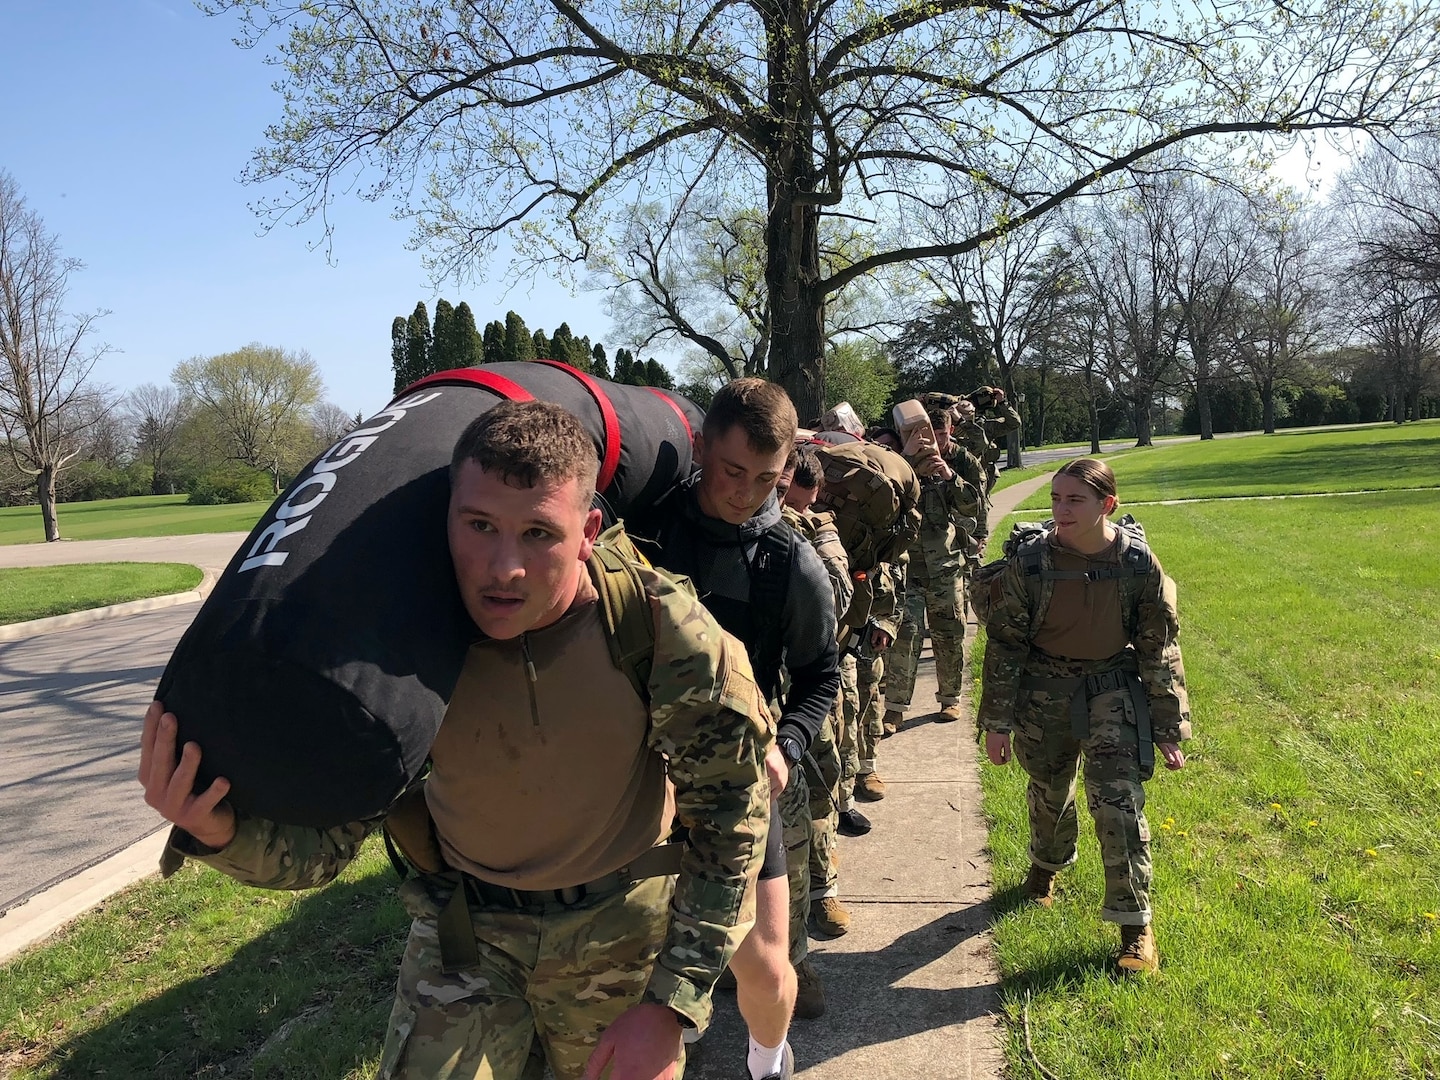 About 40 Air Force ROTC cadets from colleges throughout Ohio and Kentucky train with a “Rogue Worm” at Wright-Patterson Air Force Base, Ohio, April 22, 2022.